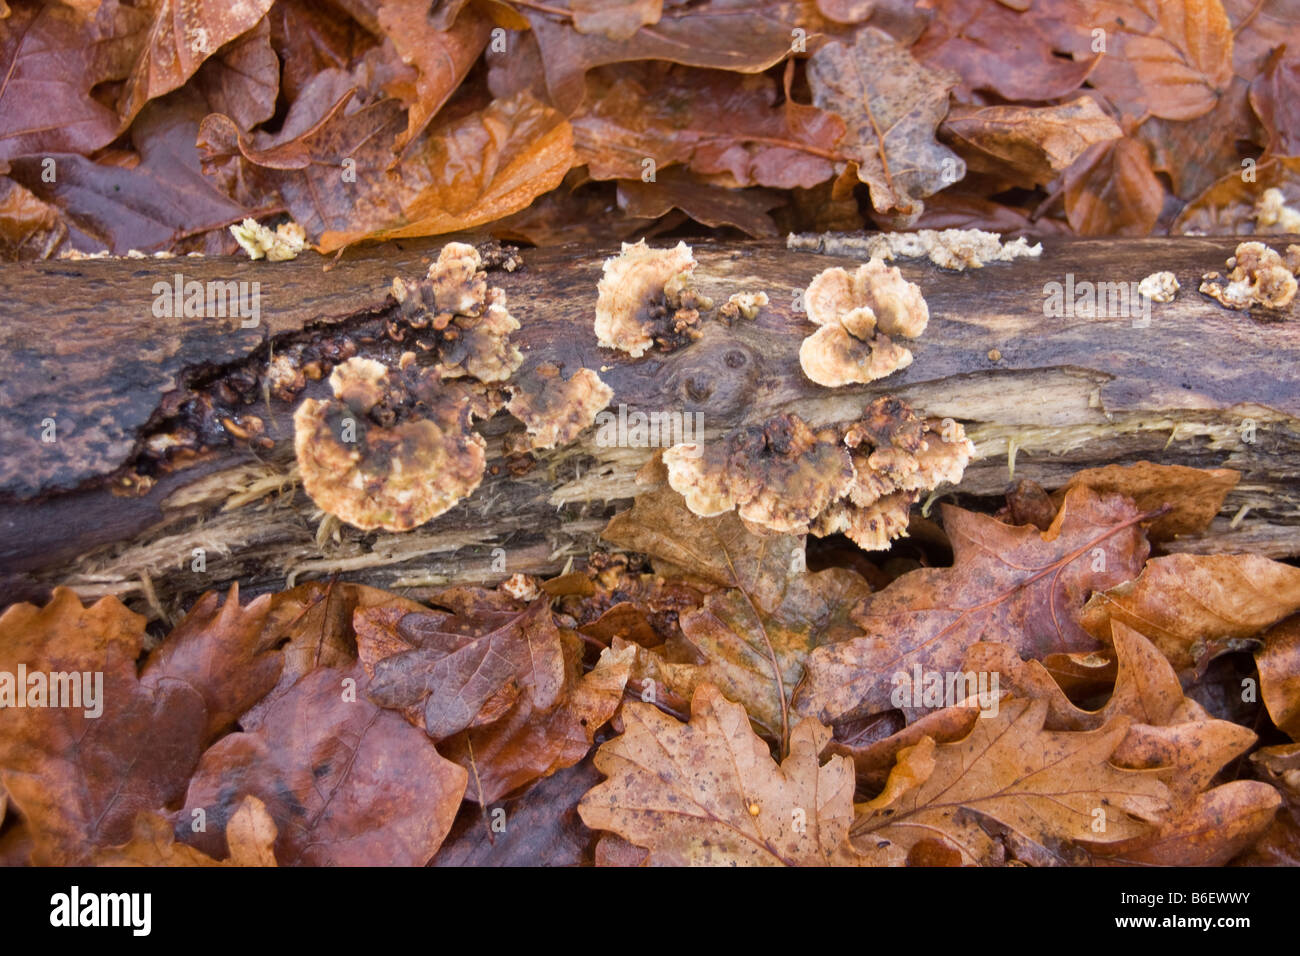 Fallen tree trunk in bed of leaves with fungus growth Stock Photo